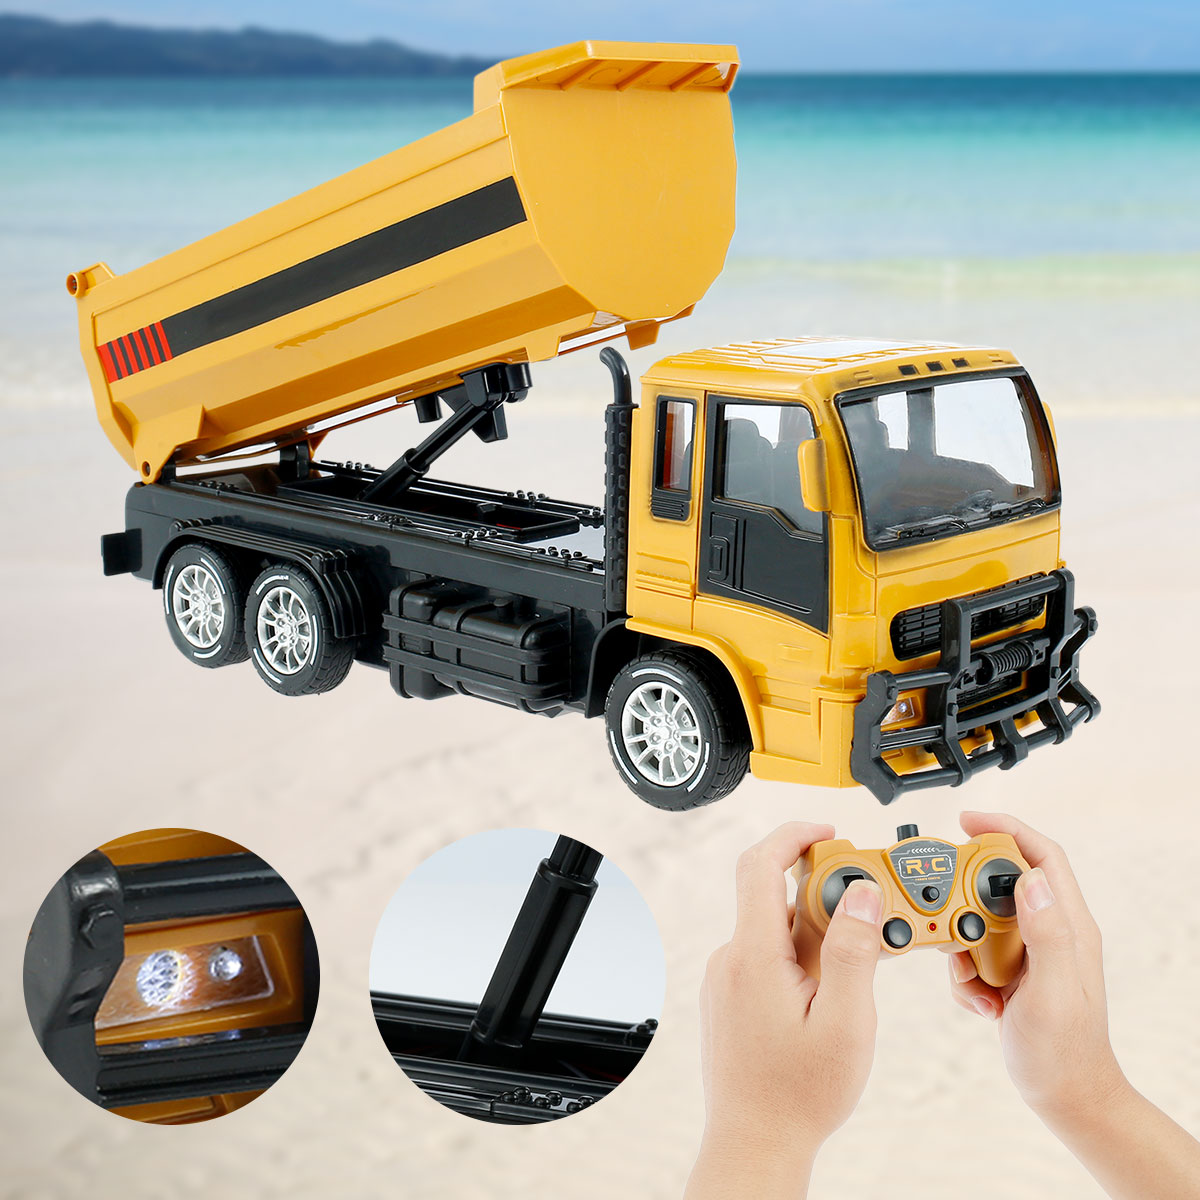 Remote Control Excavator Truck RC Construction Toys RC Dump Truck Digger Construction Vehicle Toy with LED Lights USB Electric RC Remote Control Construction Tractor Gifts for Kids - image 3 of 7